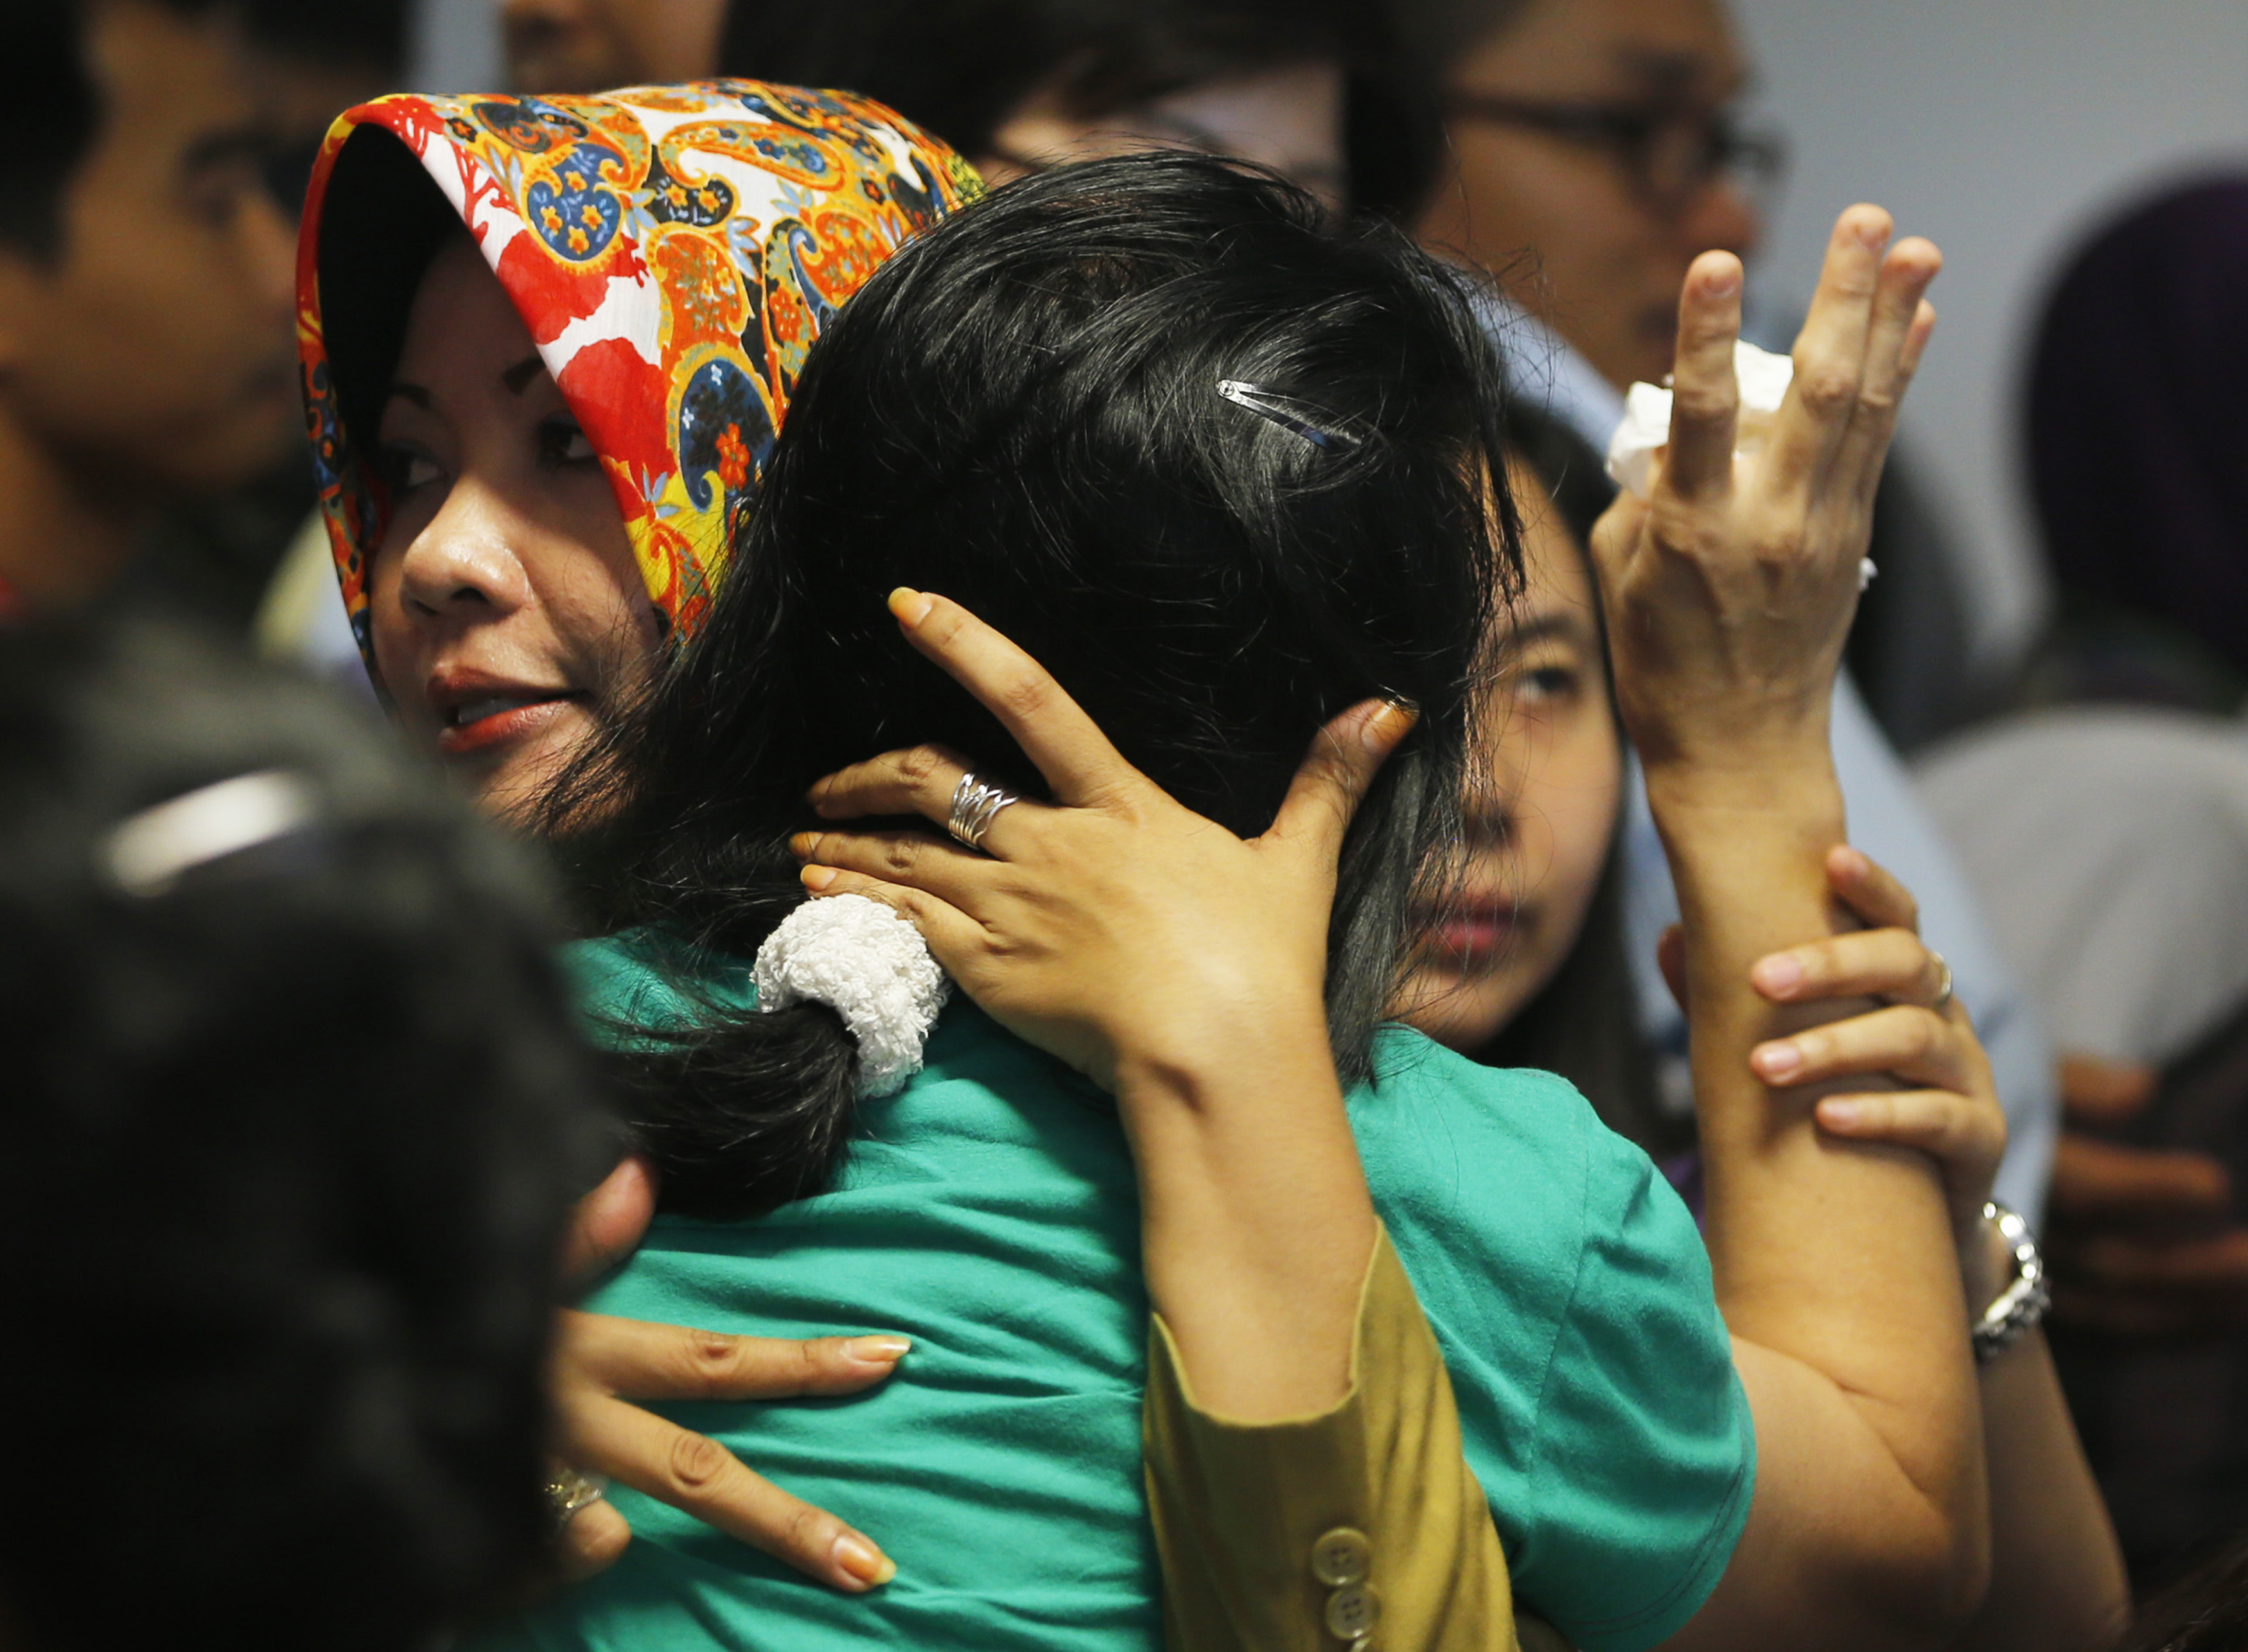 A government official, left, tries to calm a family member of passengers on board AirAsia Flight QZ 8501 at a waiting area in Juanda International Airport in Surabaya, Indonesia, on Dec. 30, 2014 (Beawiharta—Reuters)